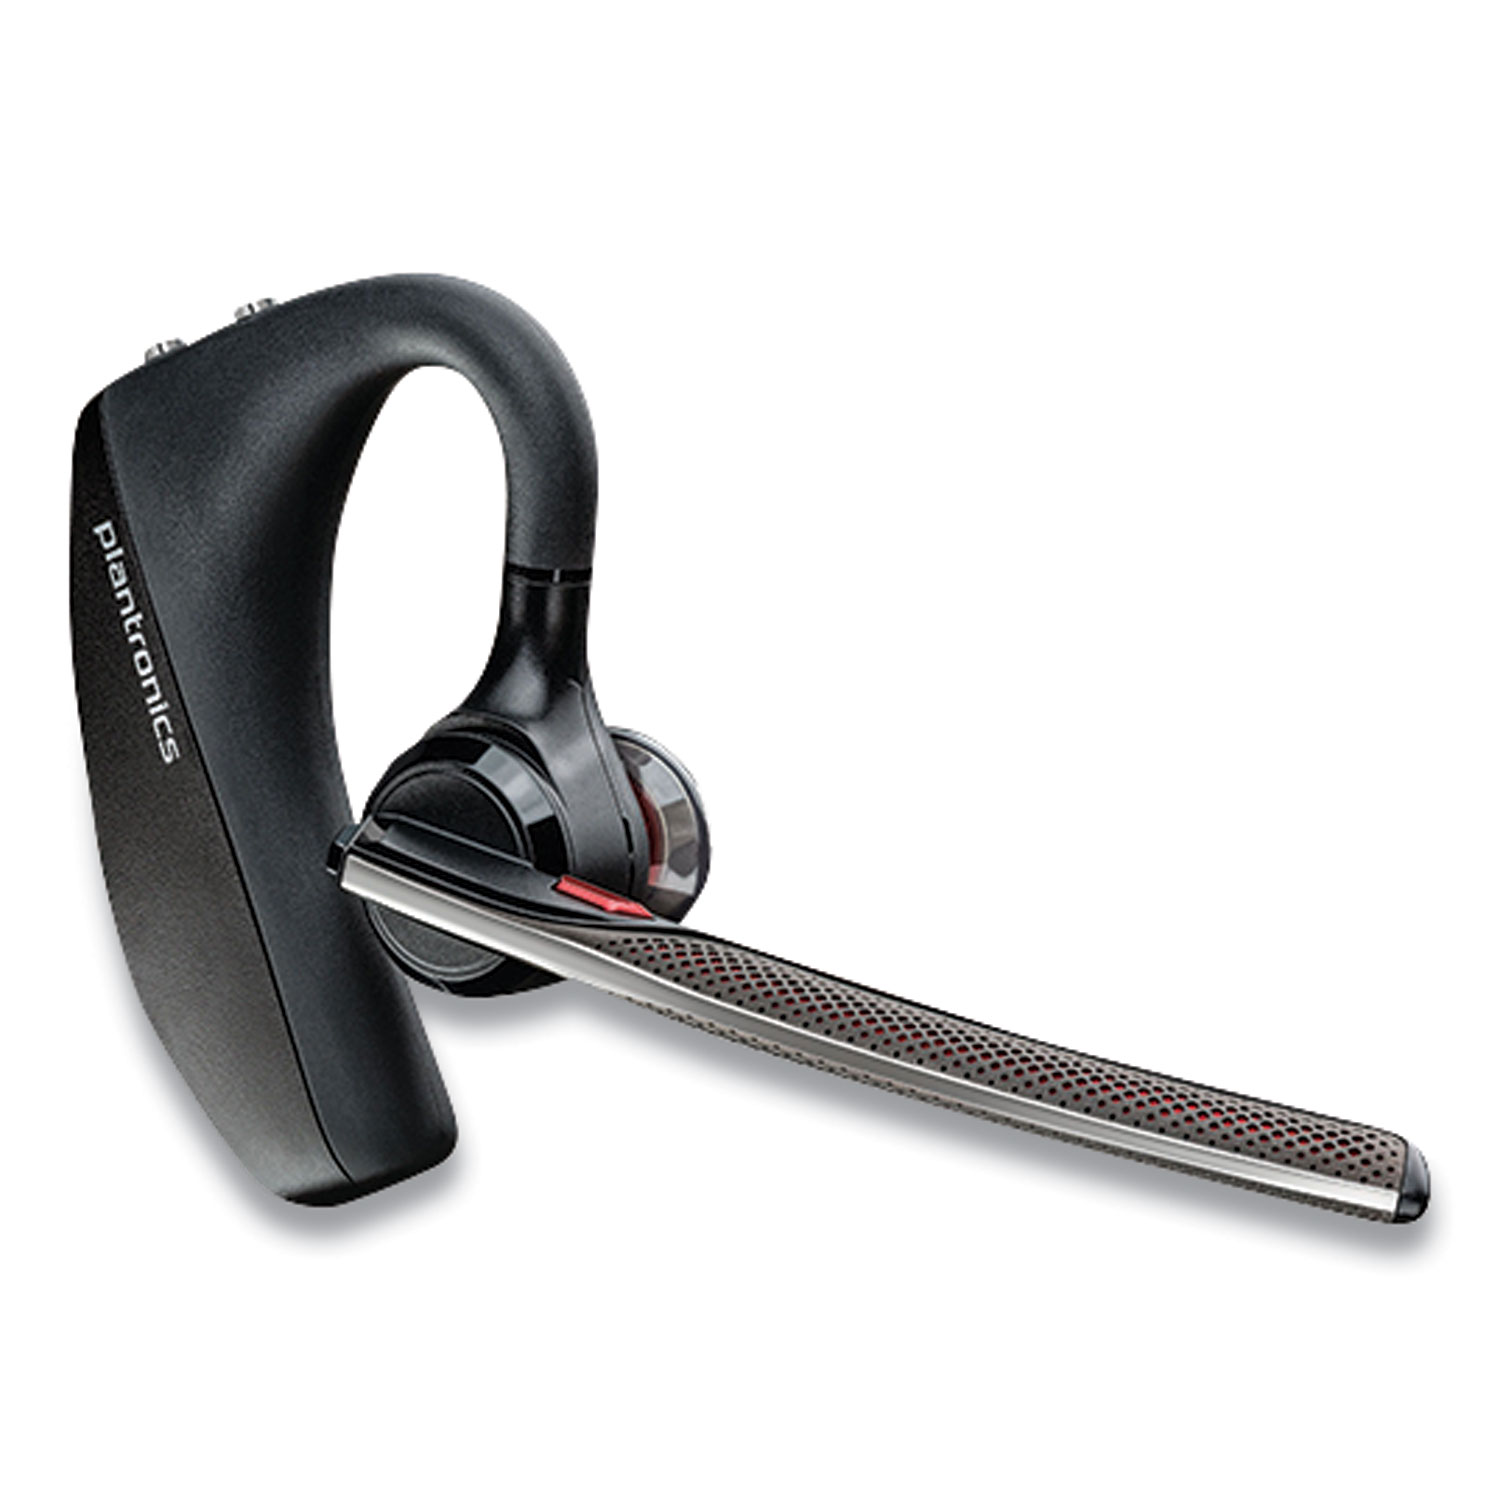  poly 203500-106 Voyager 5200 Monaural Over-the-Ear Bluetooth Headset, Black (PLN2722006) 